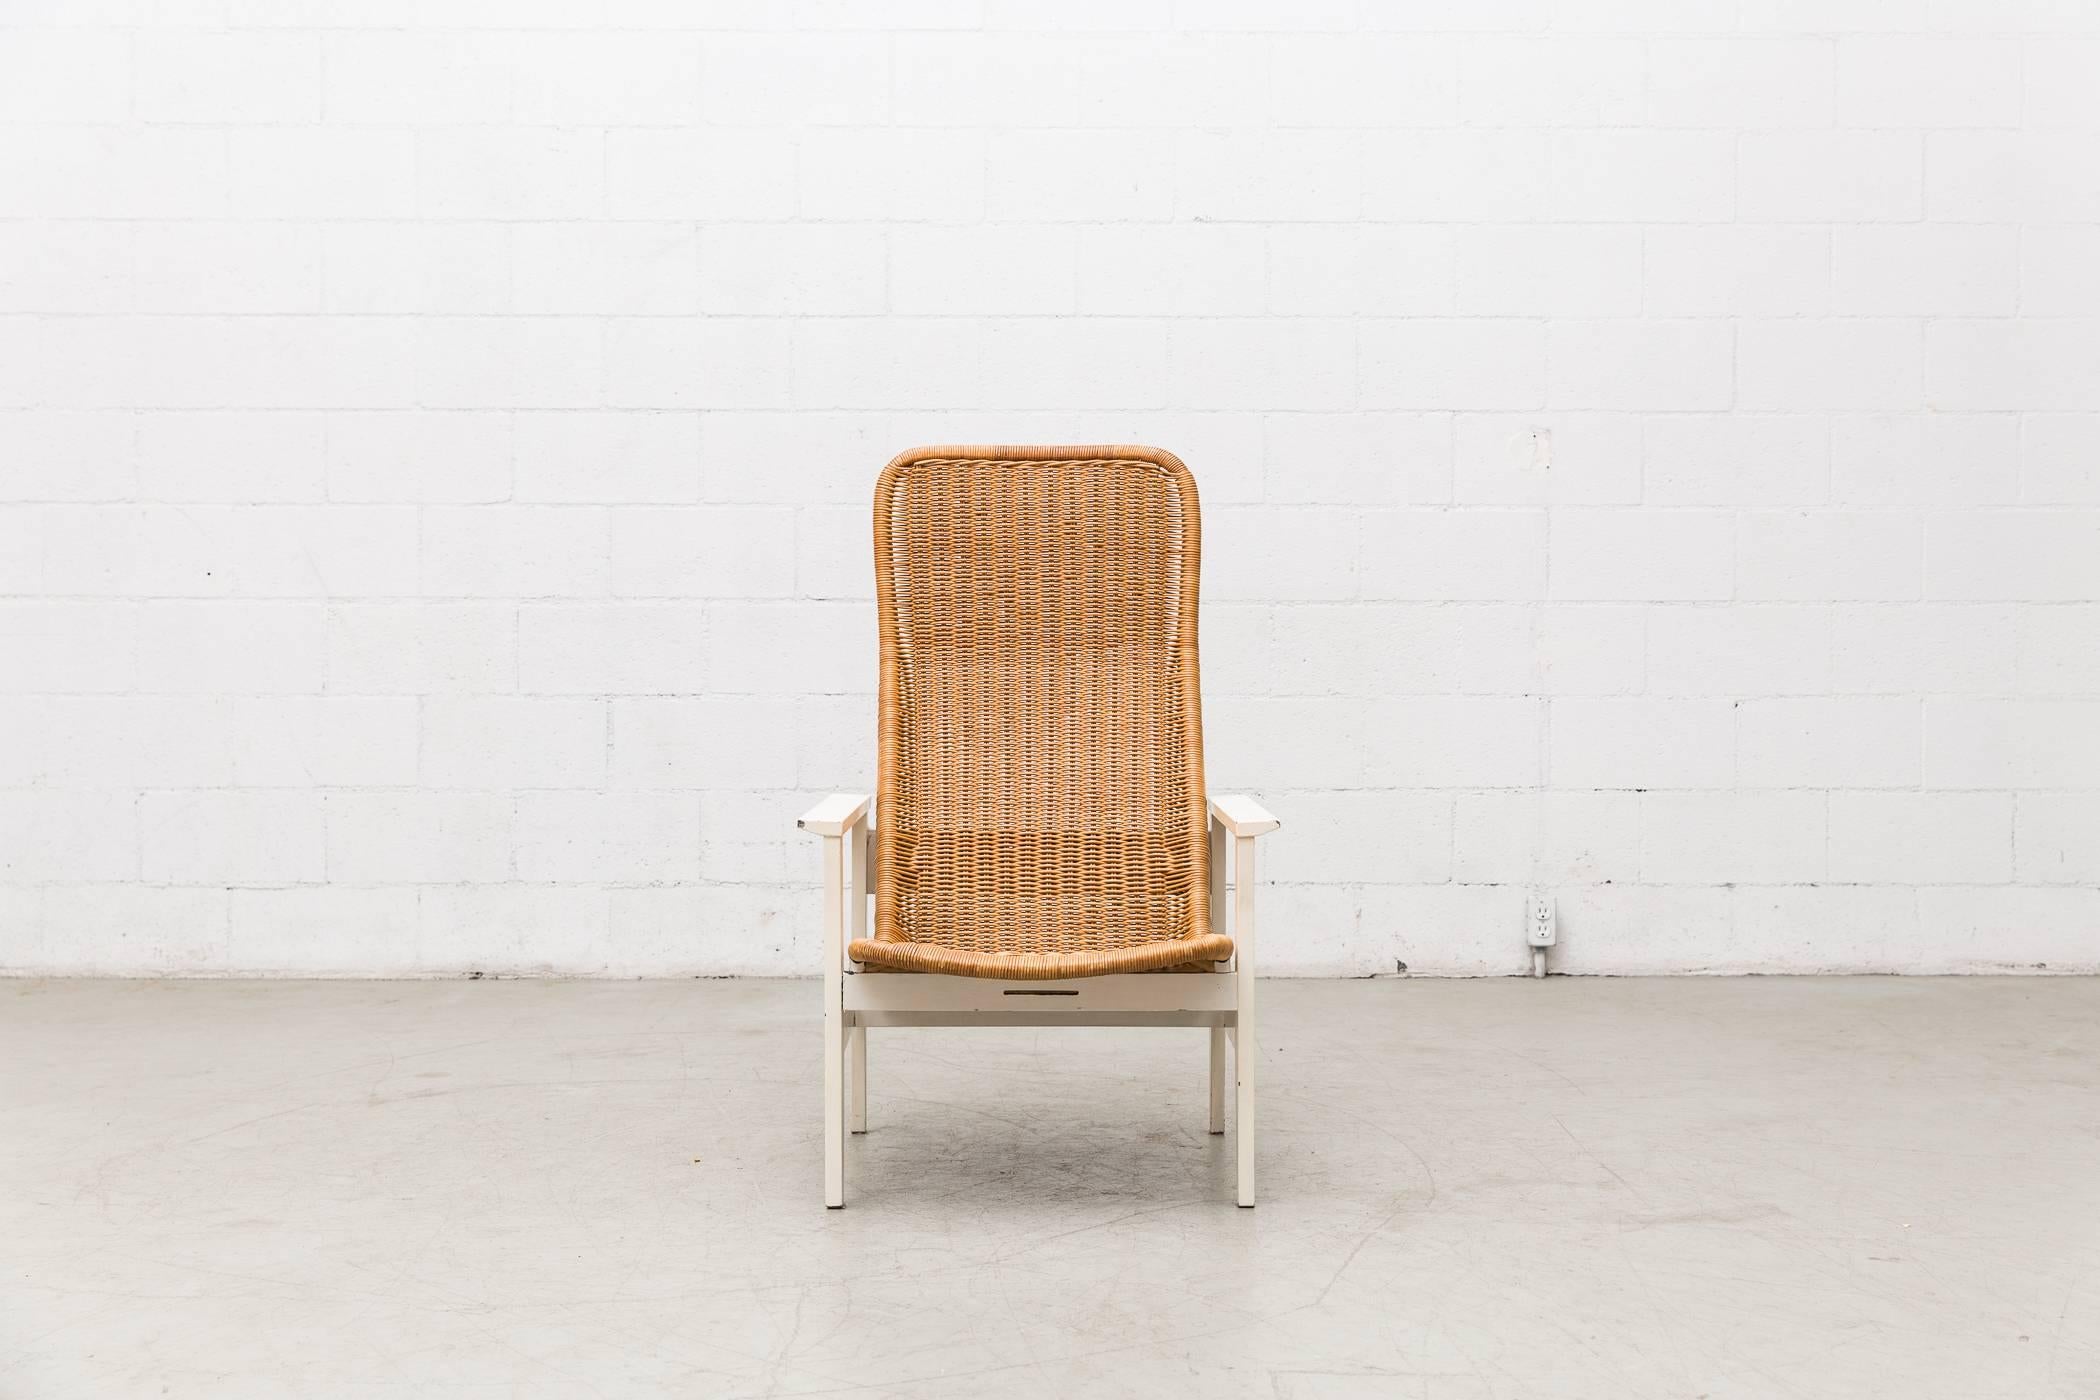 Elegantly woven Dirk Van Sliedregt rattan high back lounge chair with white wood frame and arm rests. Visible signs of wear consistent with its age and usage. Other similar styles available and listed separately.